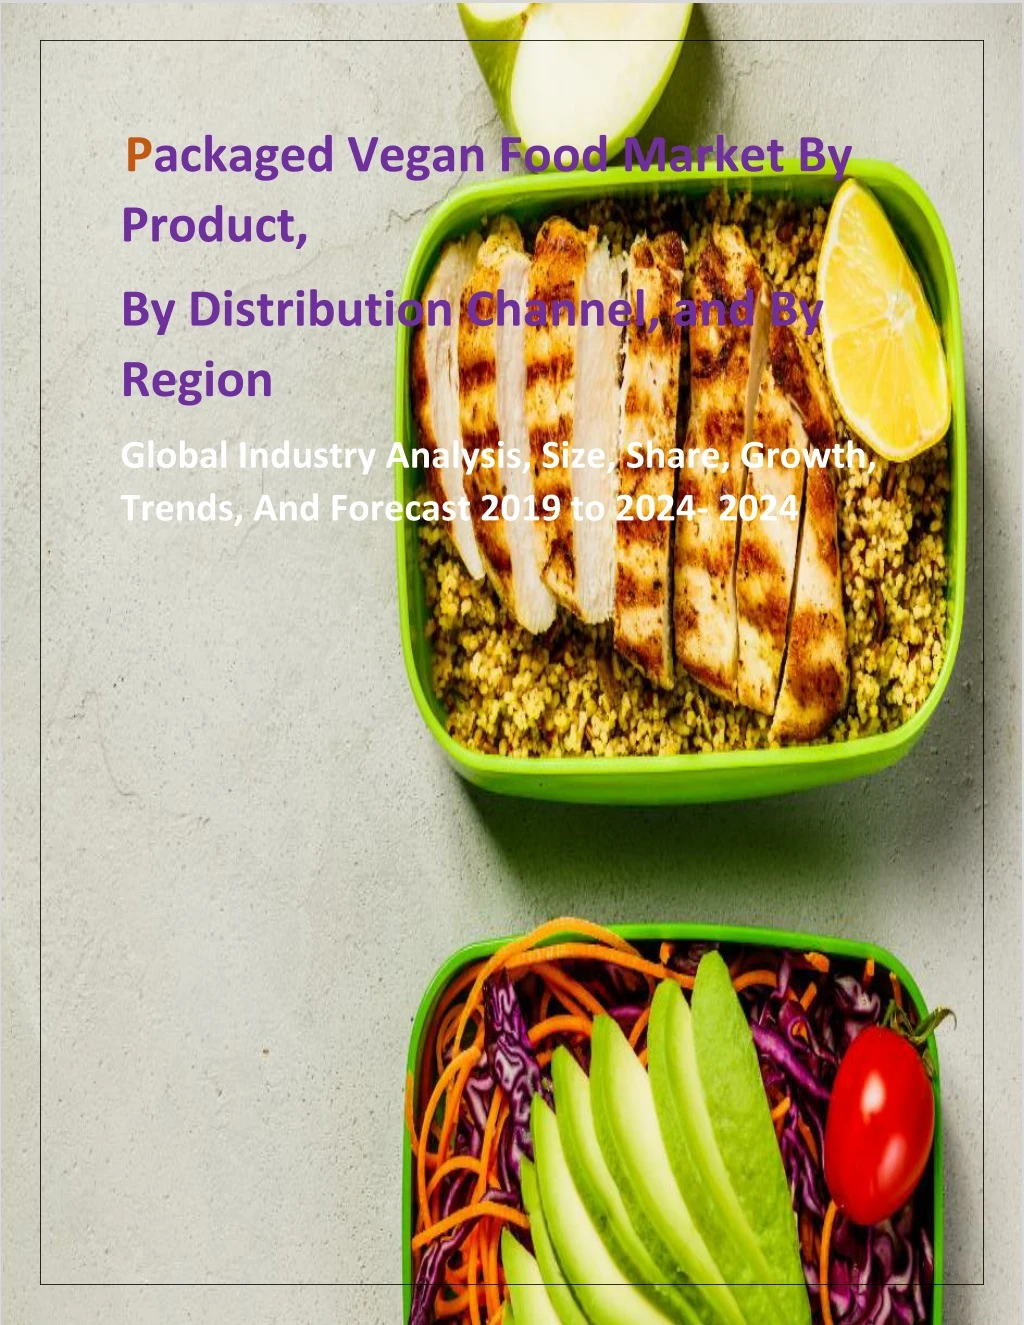 packaged vegan food market by product